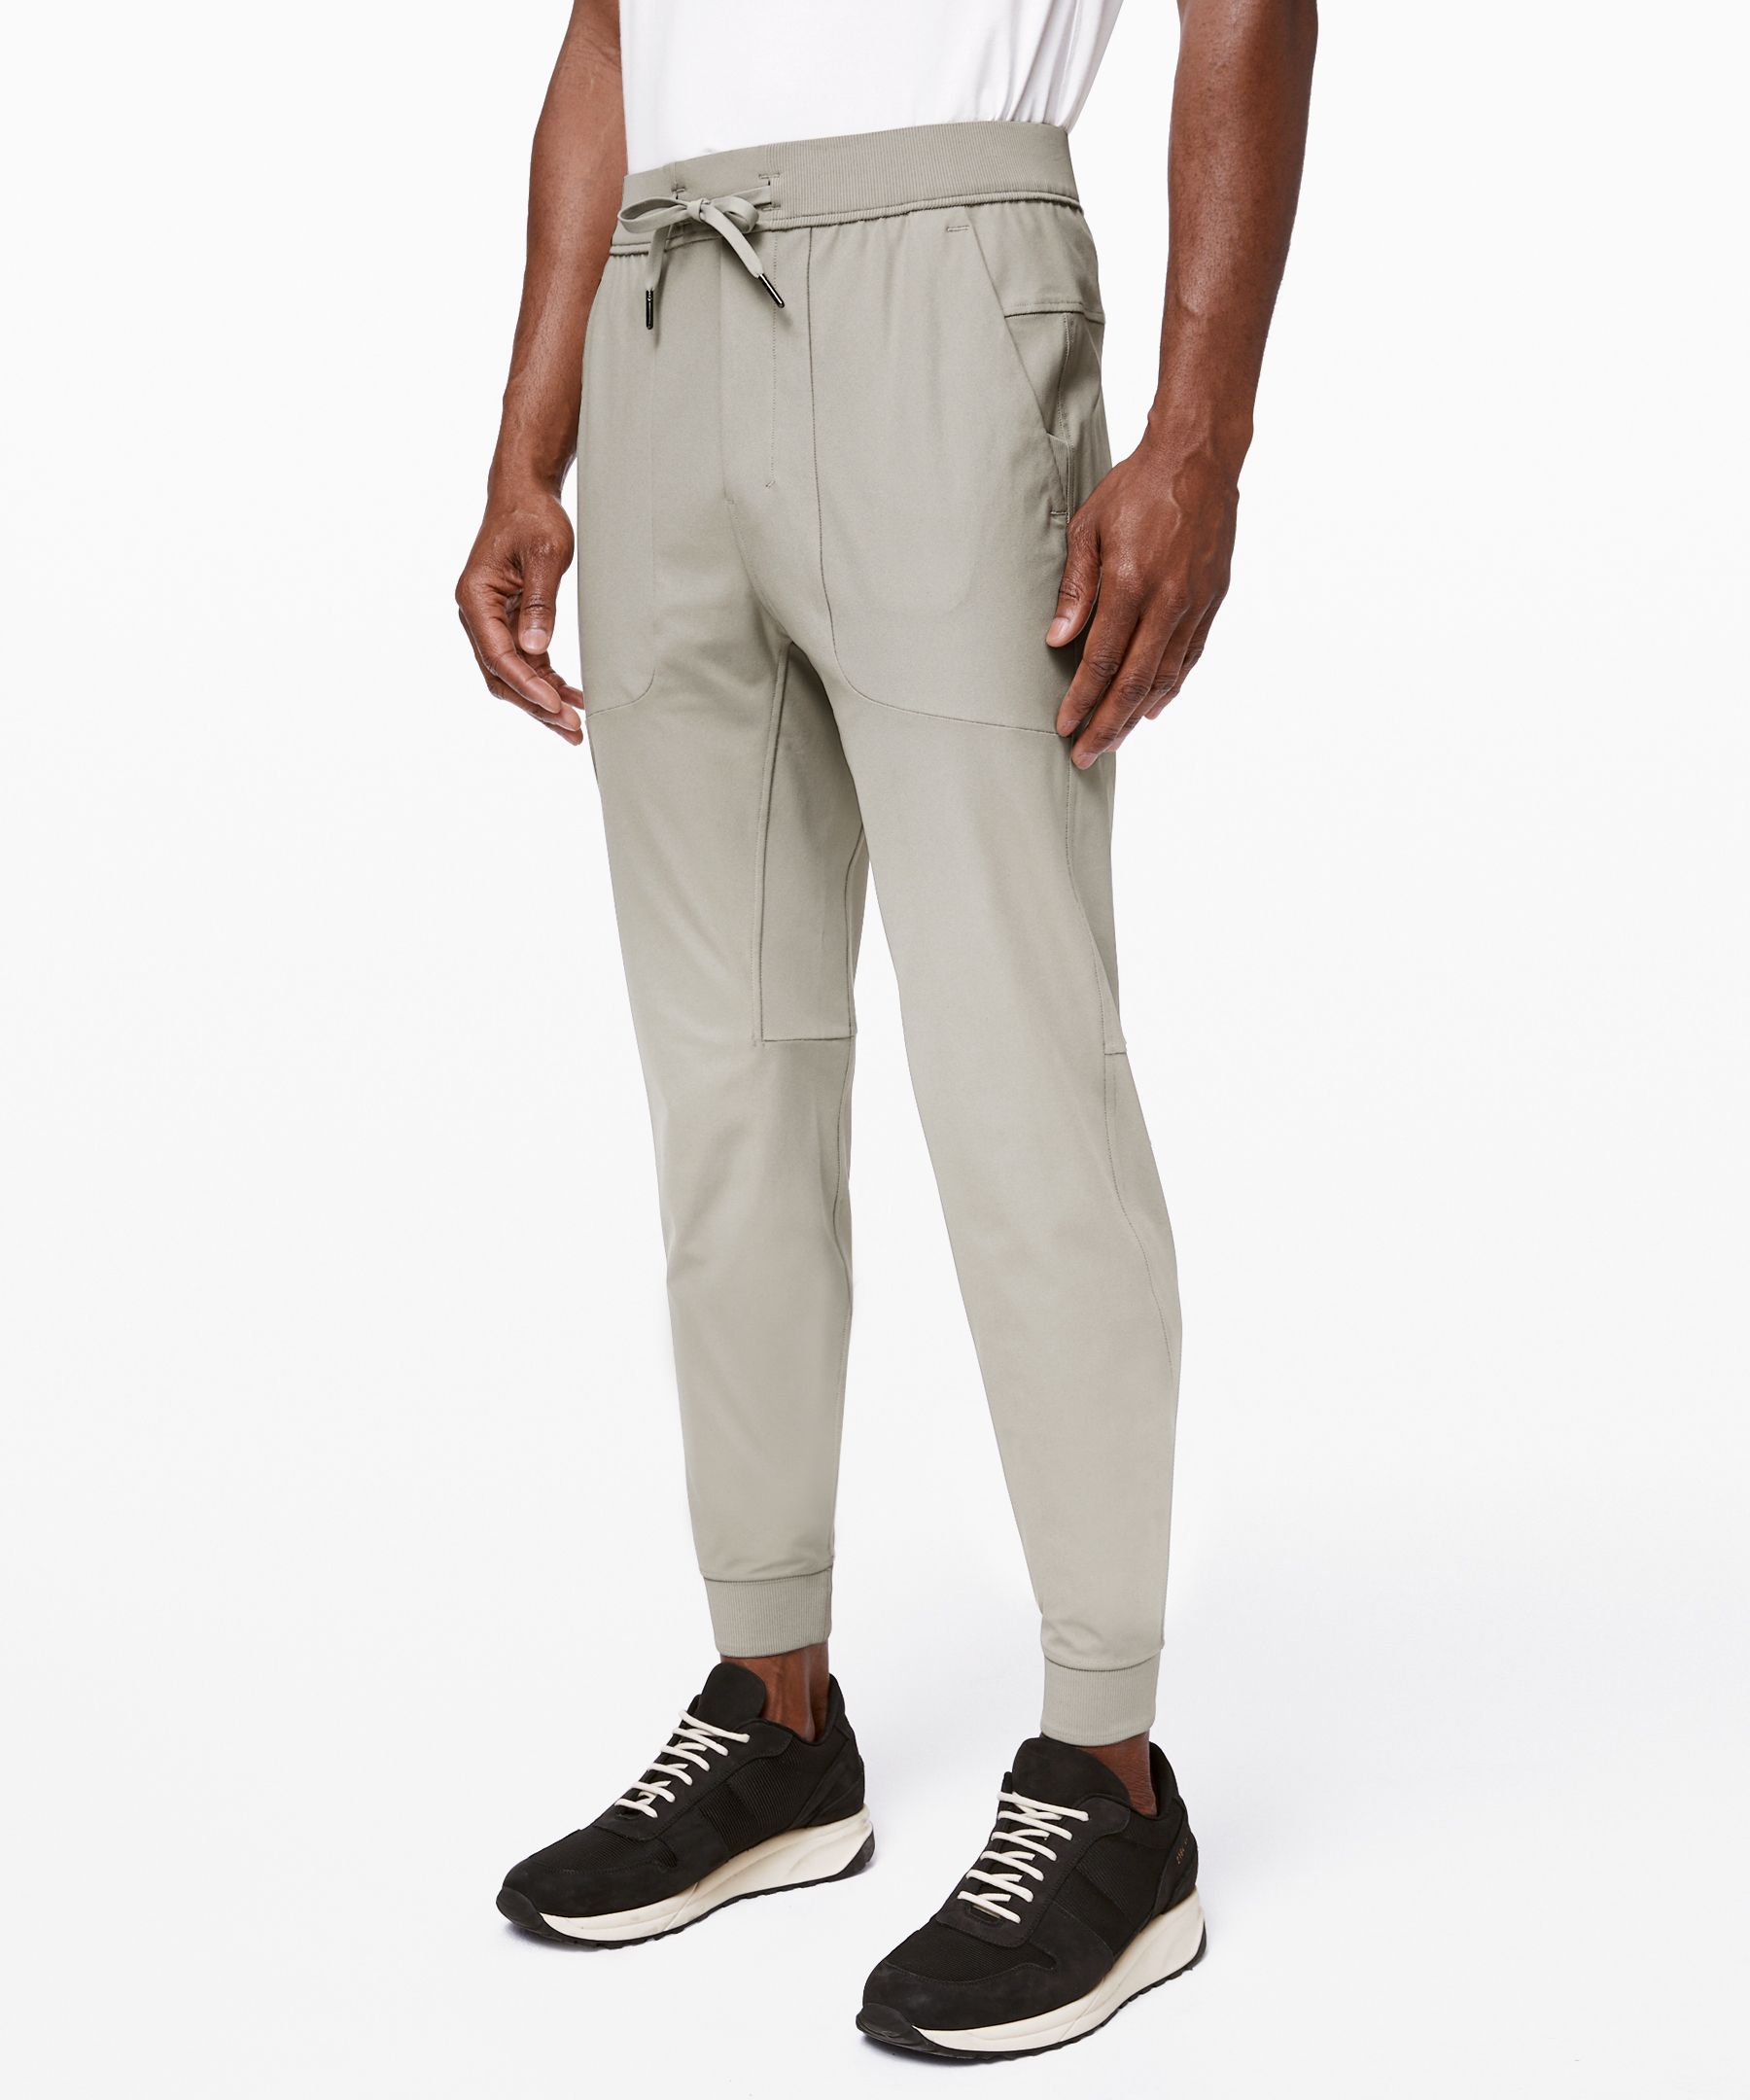 Lululemon Abc Jogger Tall *warpstreme 32" Online Only In Riverstone